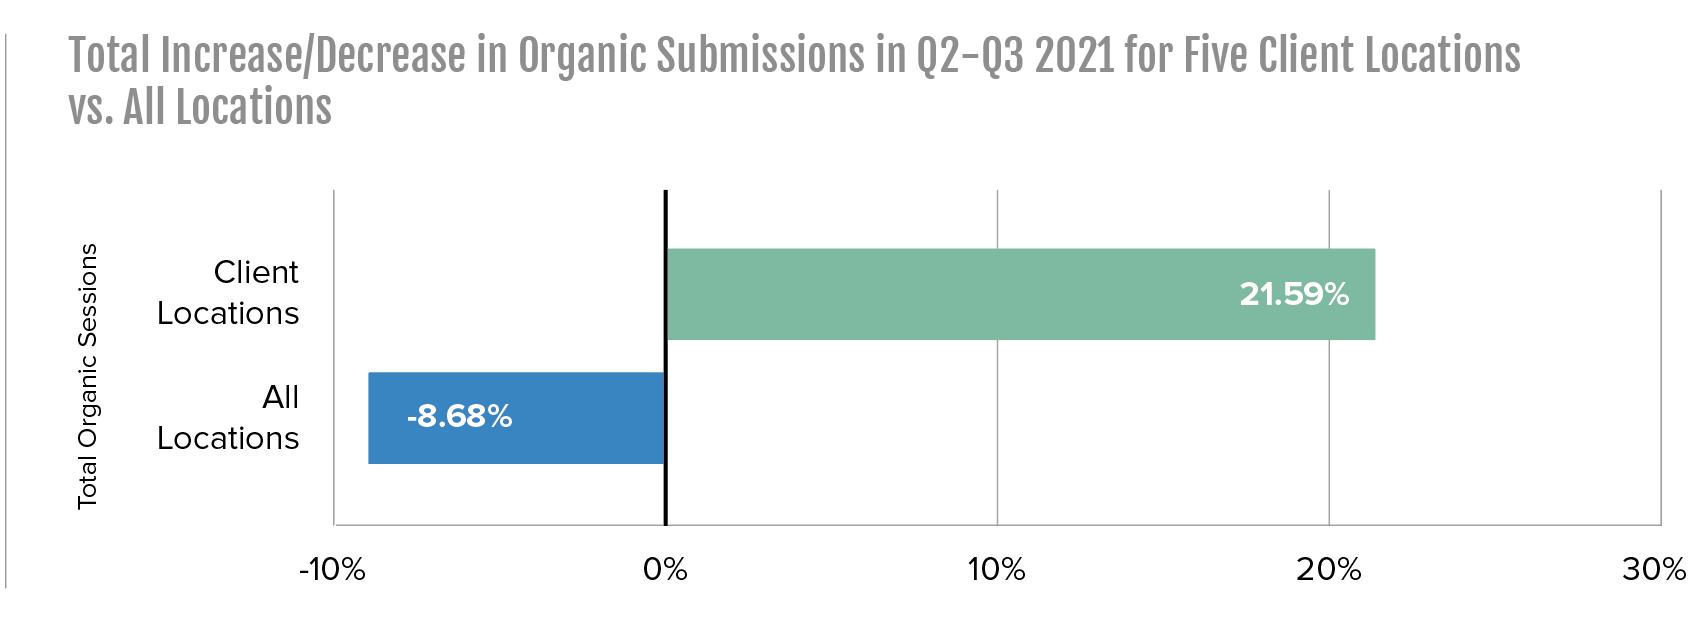 total increase/decrease in organic submissions